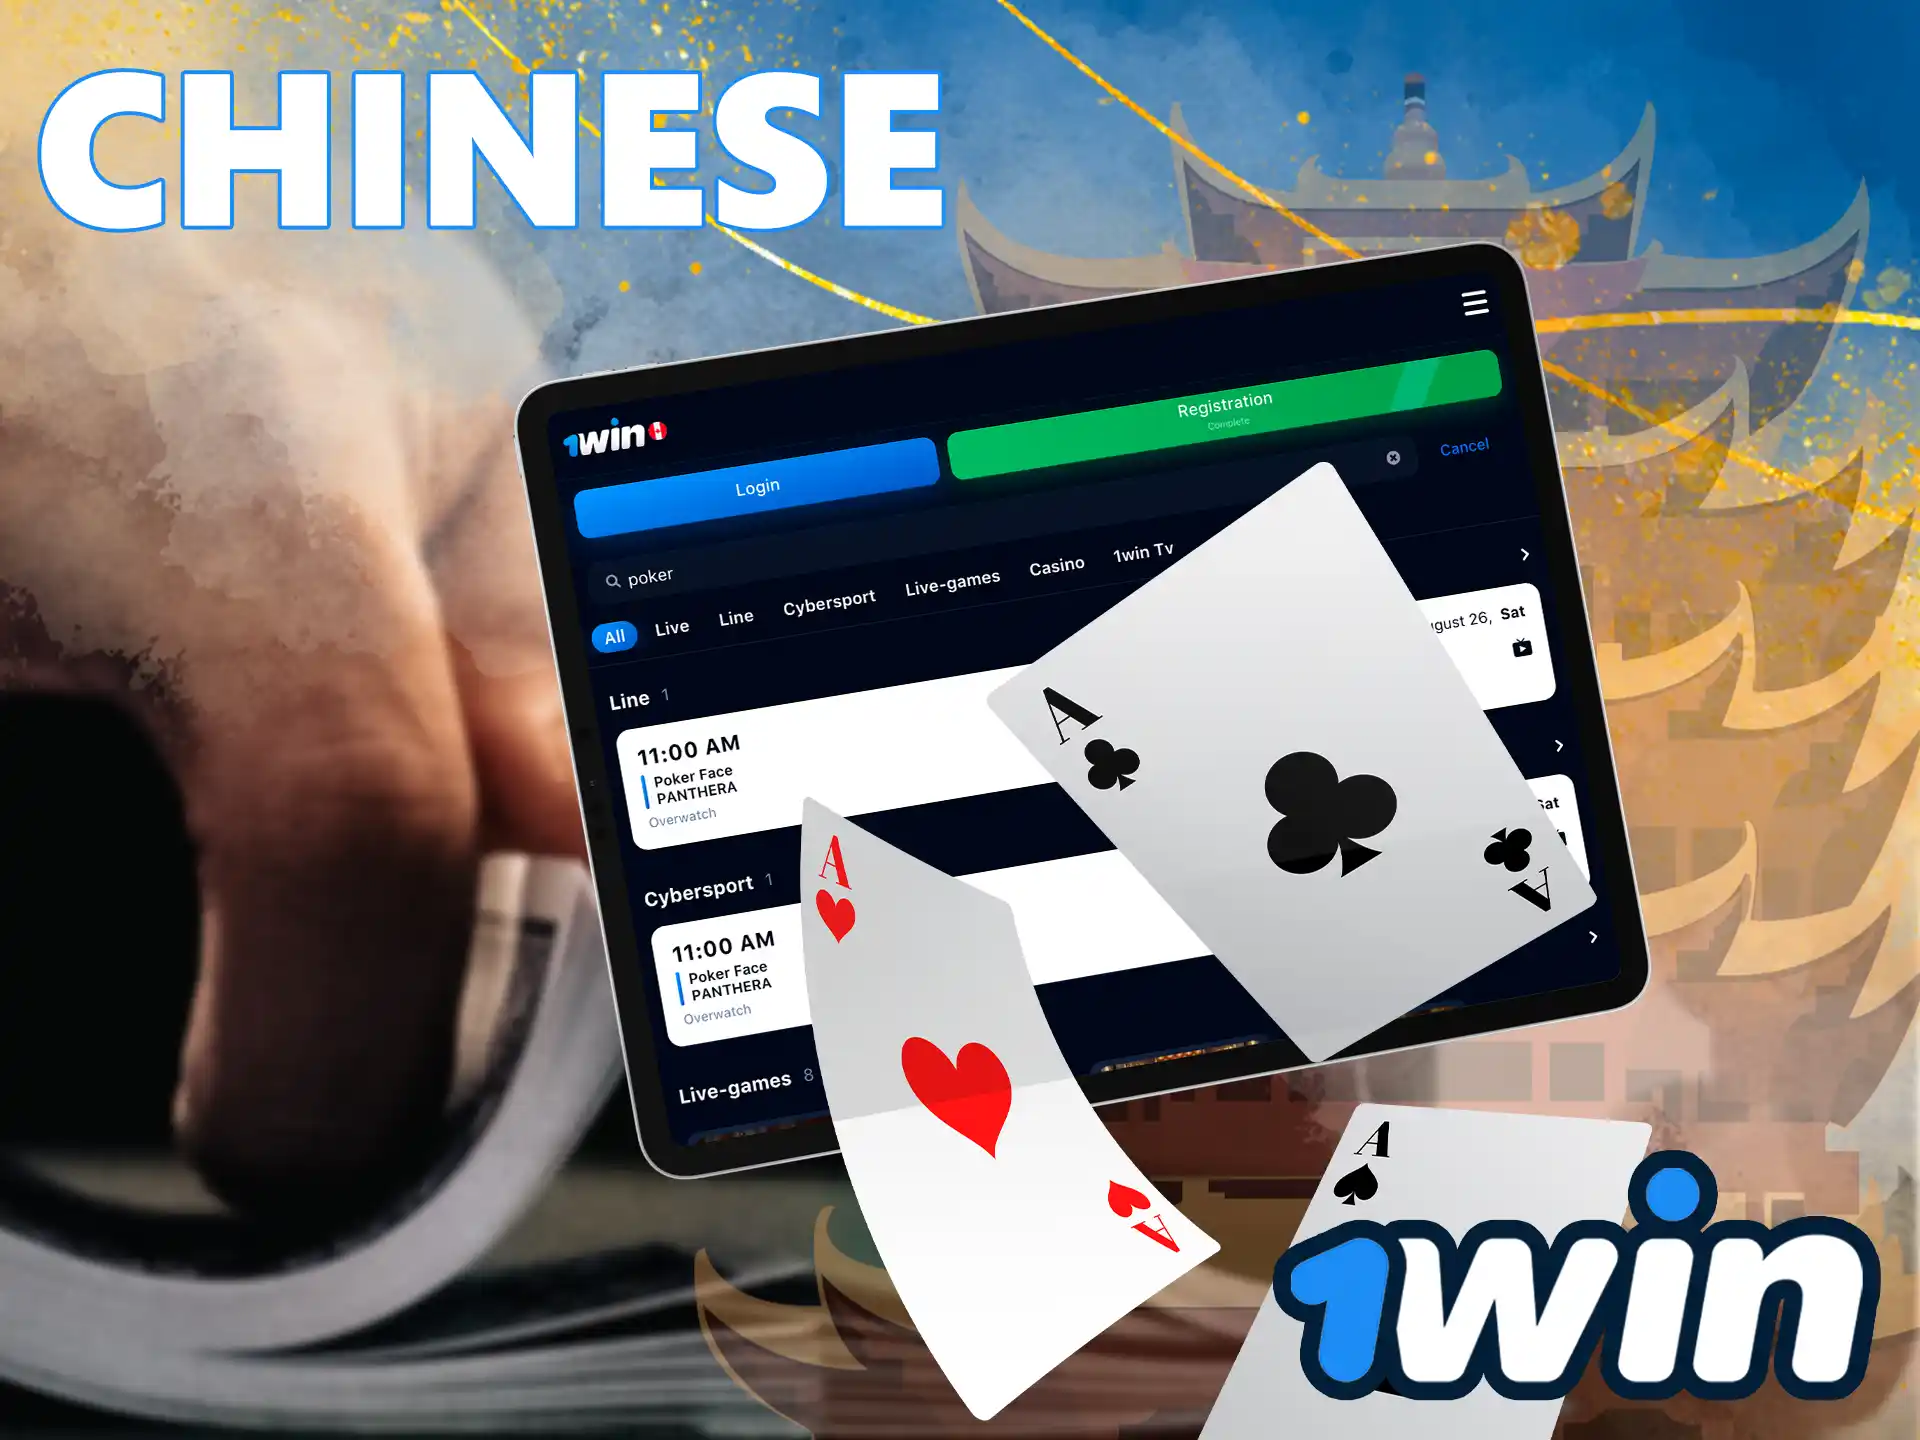 This sub-species of online poker game 1Win has its origins in China, a distinctive interesting with its own interesting features.